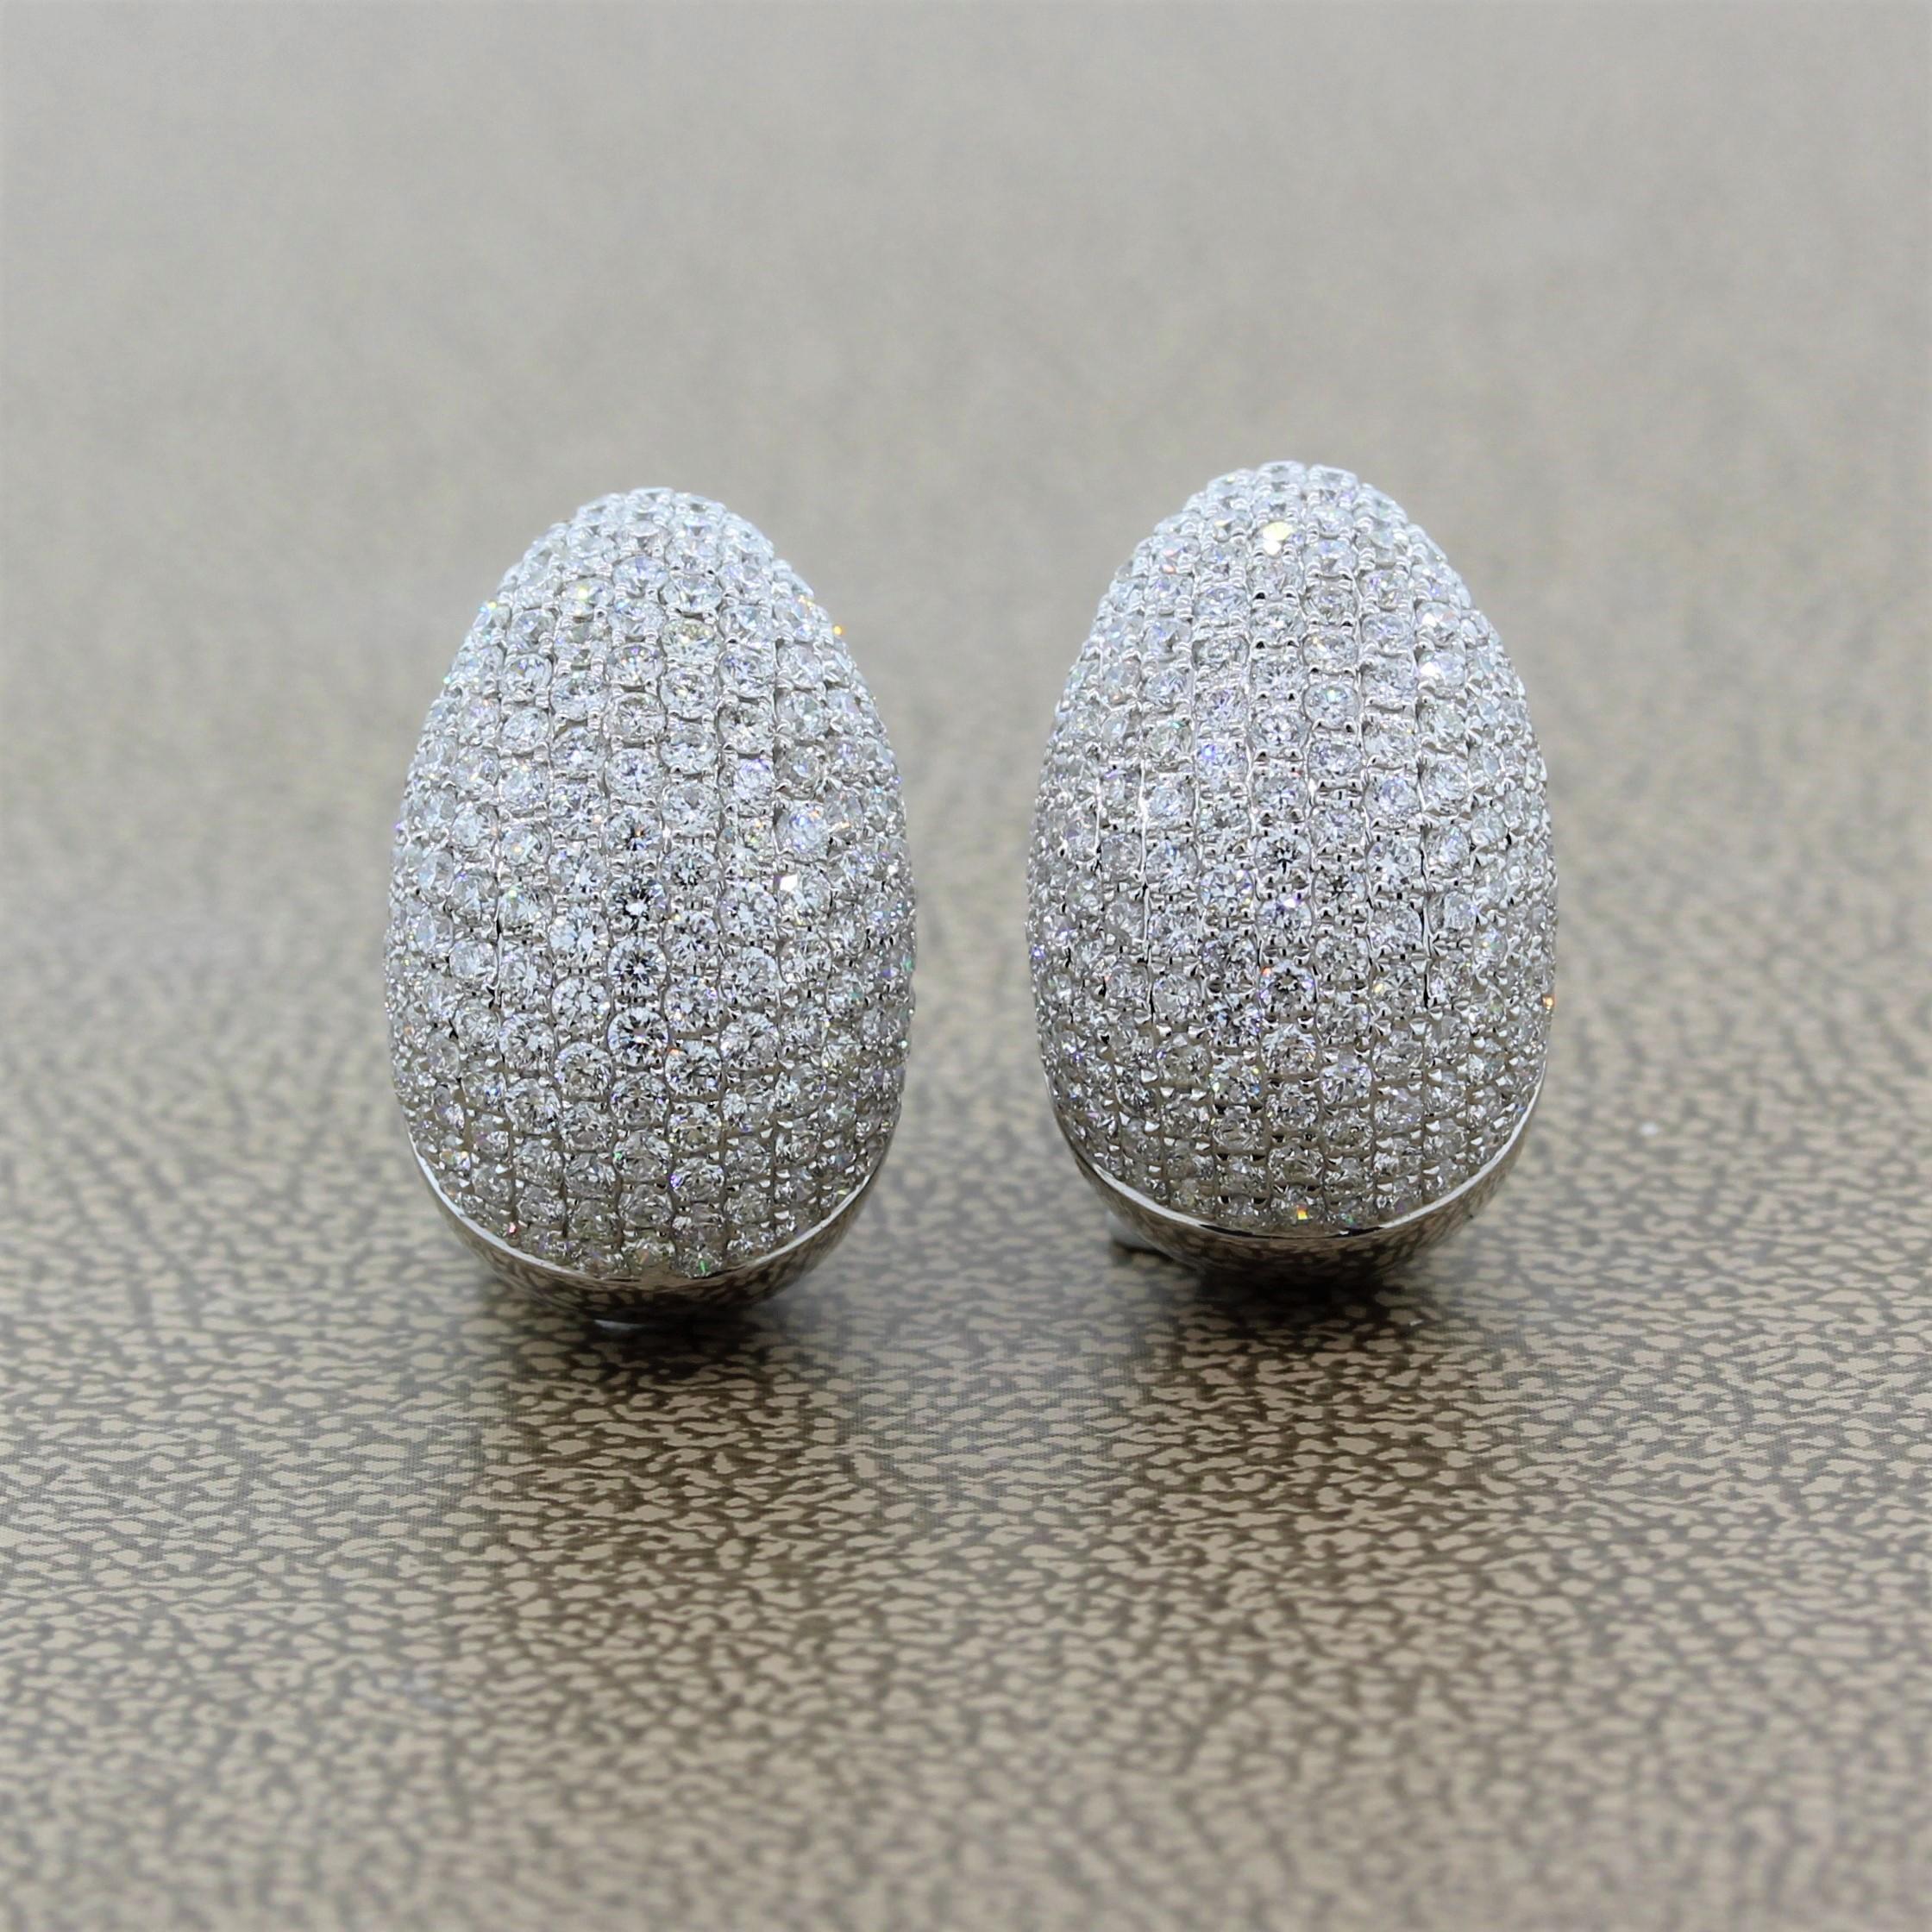 A contemporary pair of earrings featuring 3.90 carats of VS quality diamonds. The round brilliant cut diamonds are pave set in an 18K white gold pear shape. The tear drop shape lends a small drop to these dynamic earrings.

Earring Length: 0.60